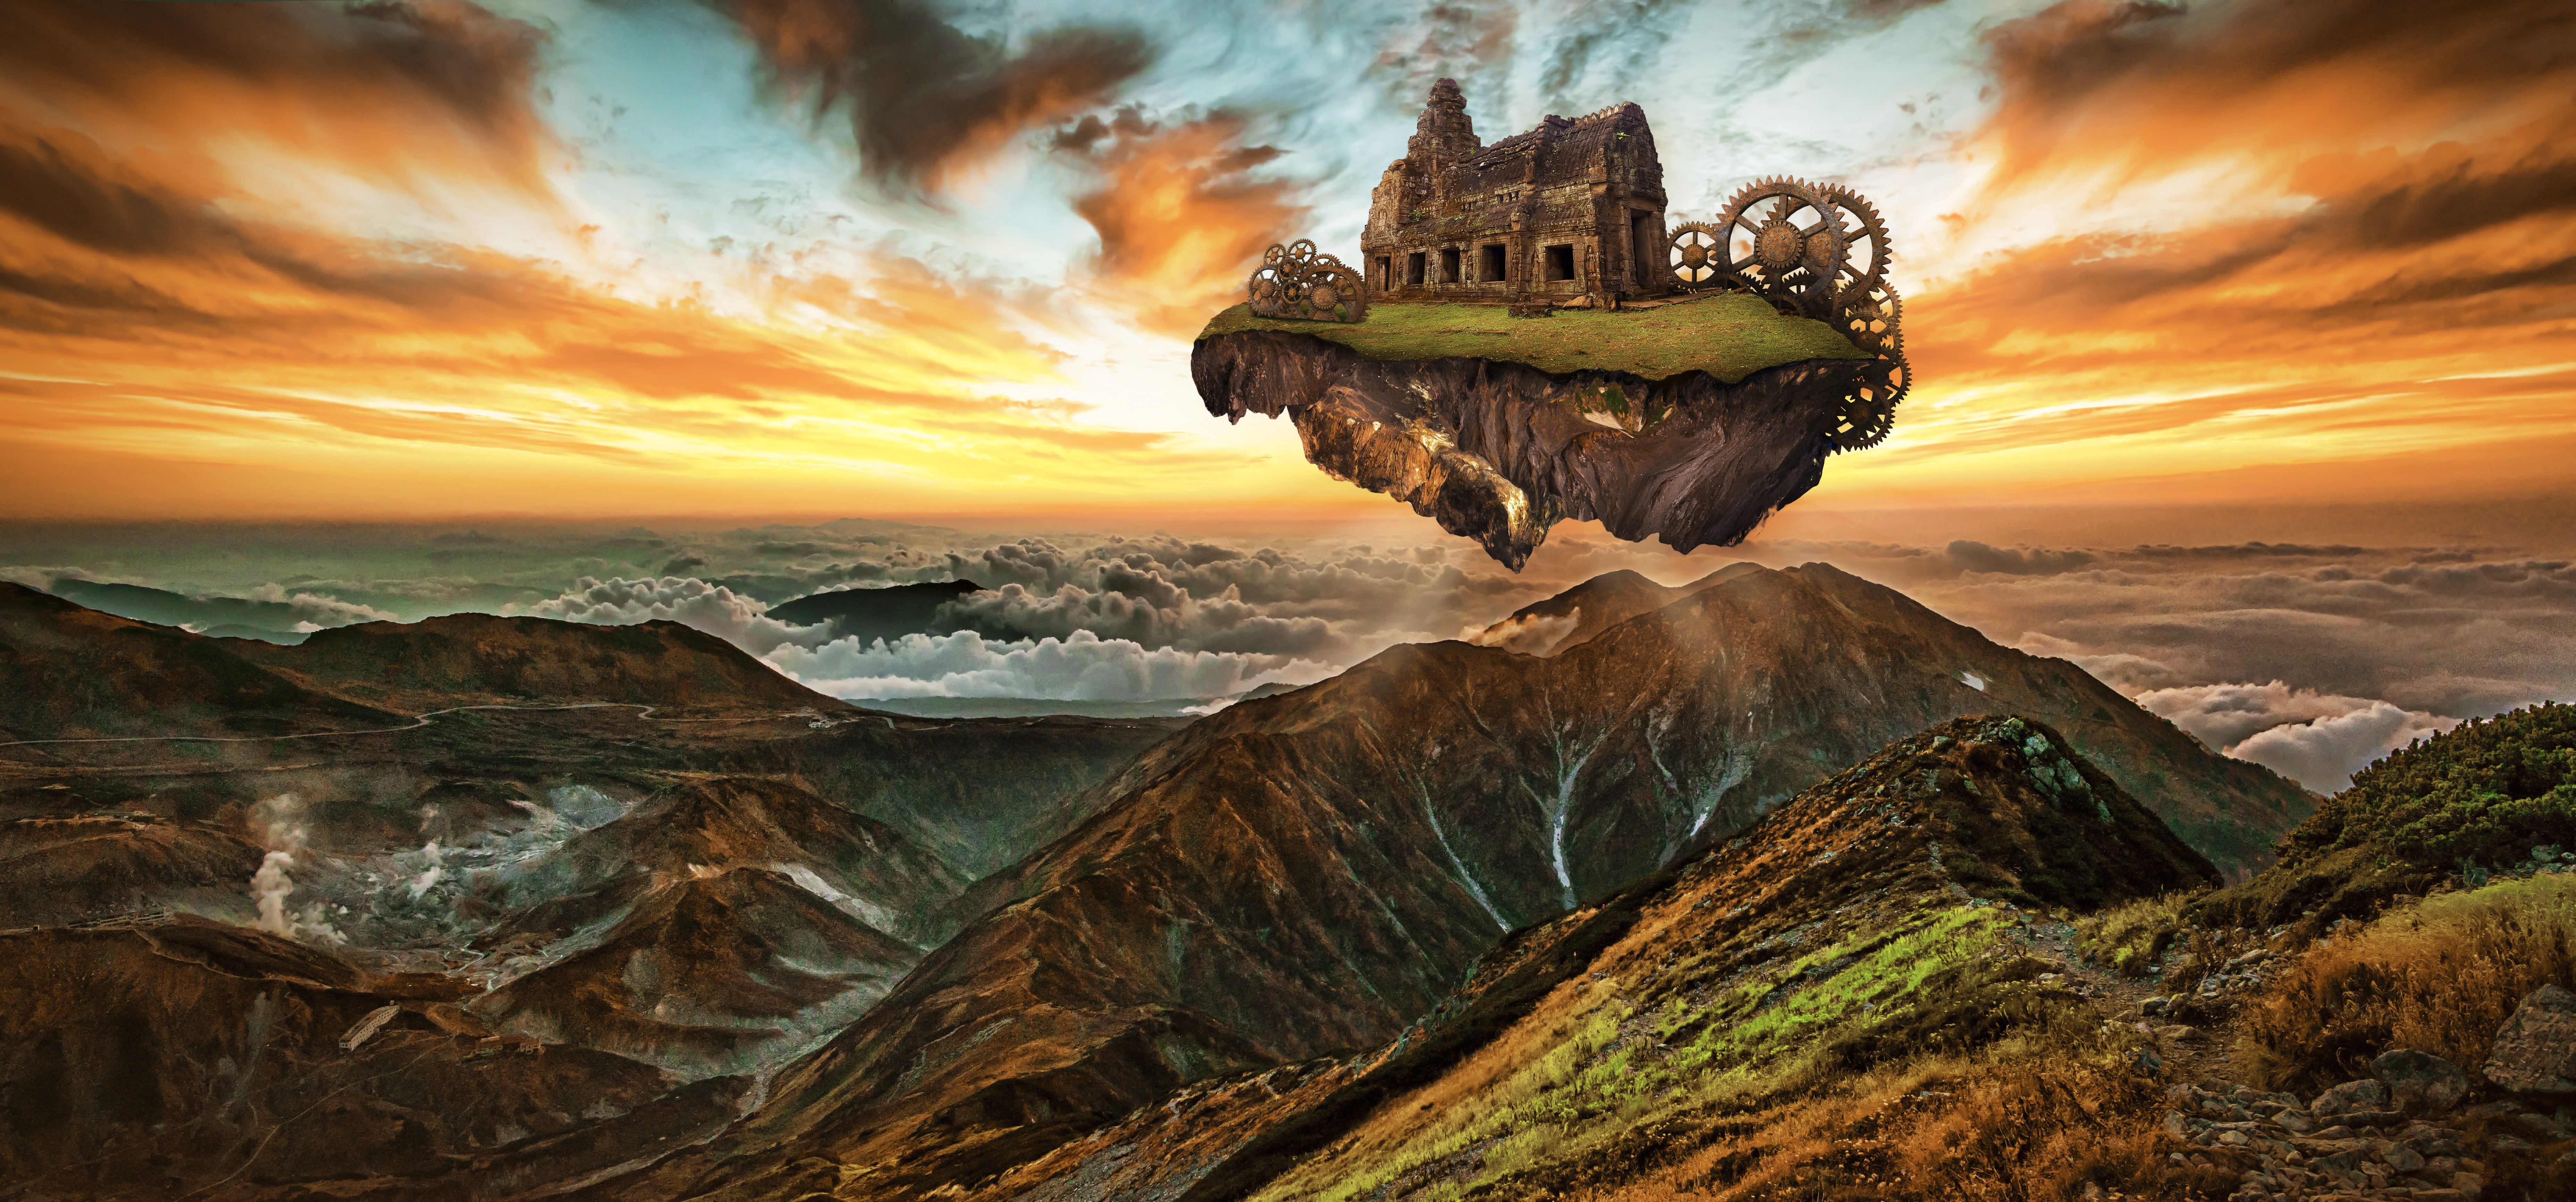 136695 download wallpaper structure, fantasy, mountains, photoshop, imagination, engine, gears, steampunk screensavers and pictures for free